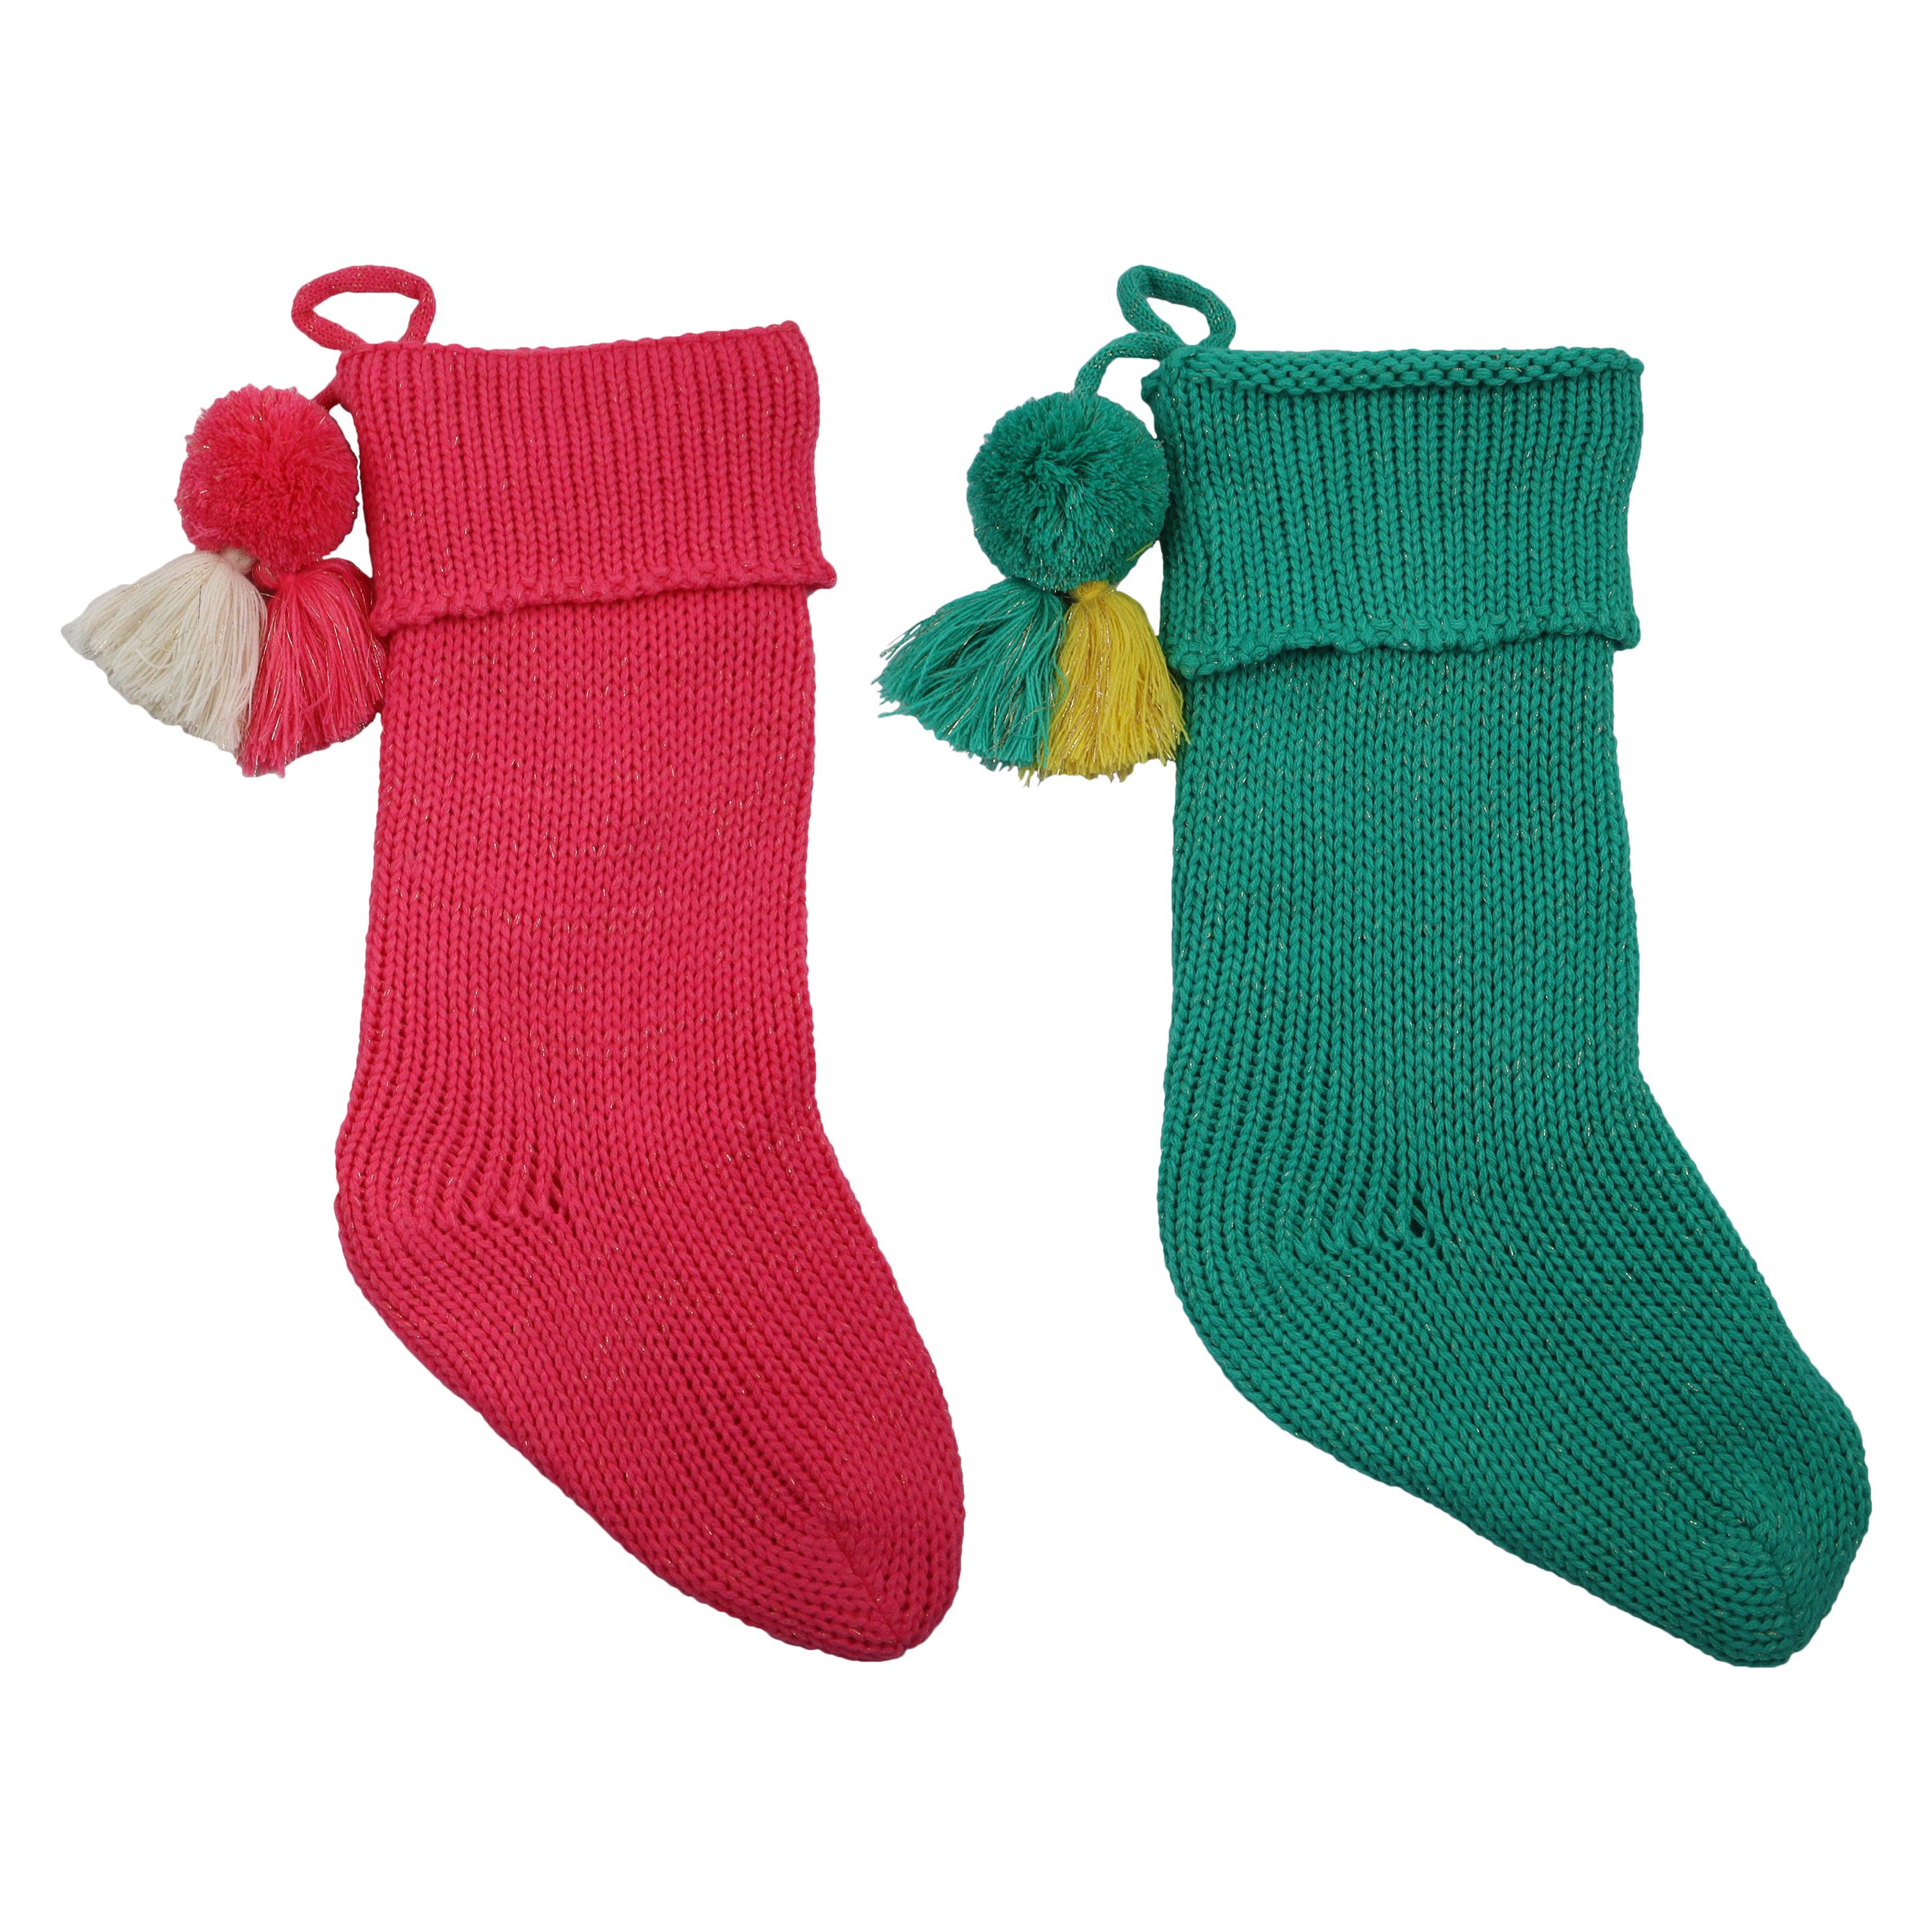 Holiday Time Pink and Aqua Stockings, 20", 2 Pack - image 1 of 7